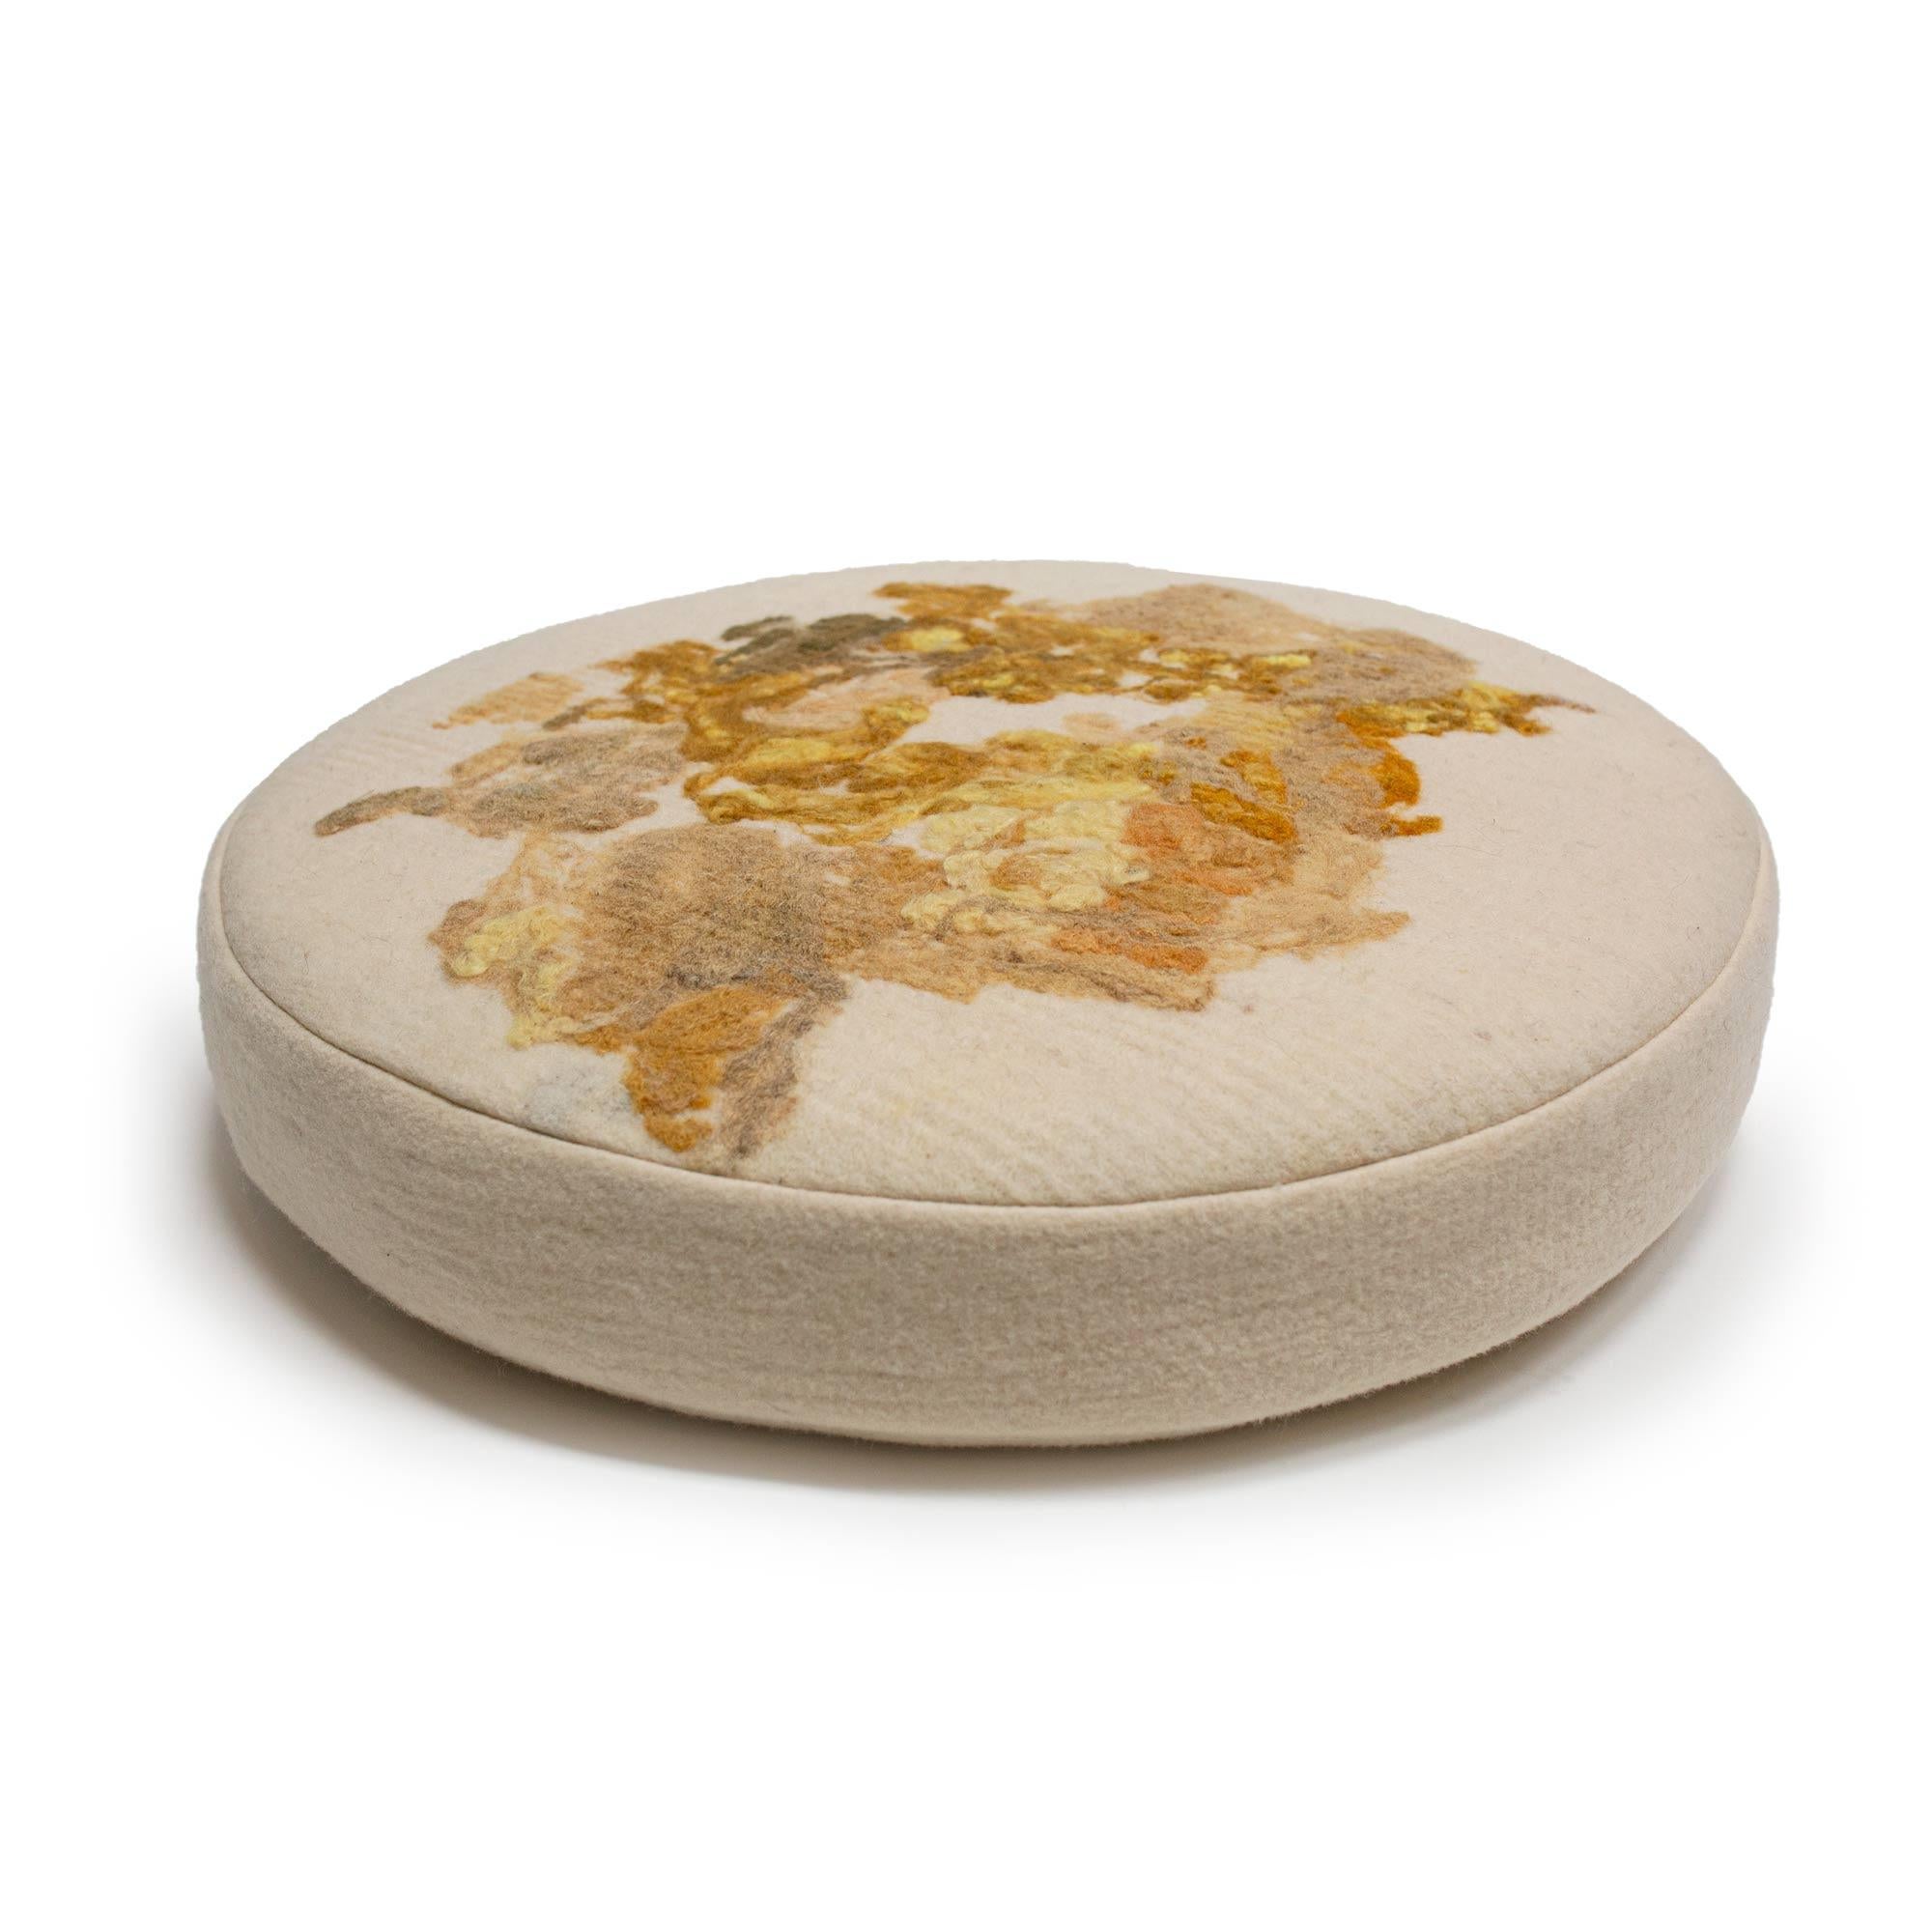 Felted wool round floor cushion, in turmeric-dye medallion yellow felted from local, fiber shed wool in a creamy, natural background, our indigo and green apple dyes are nature-made and part of our Botanical Collection.
Raw fleeces are 